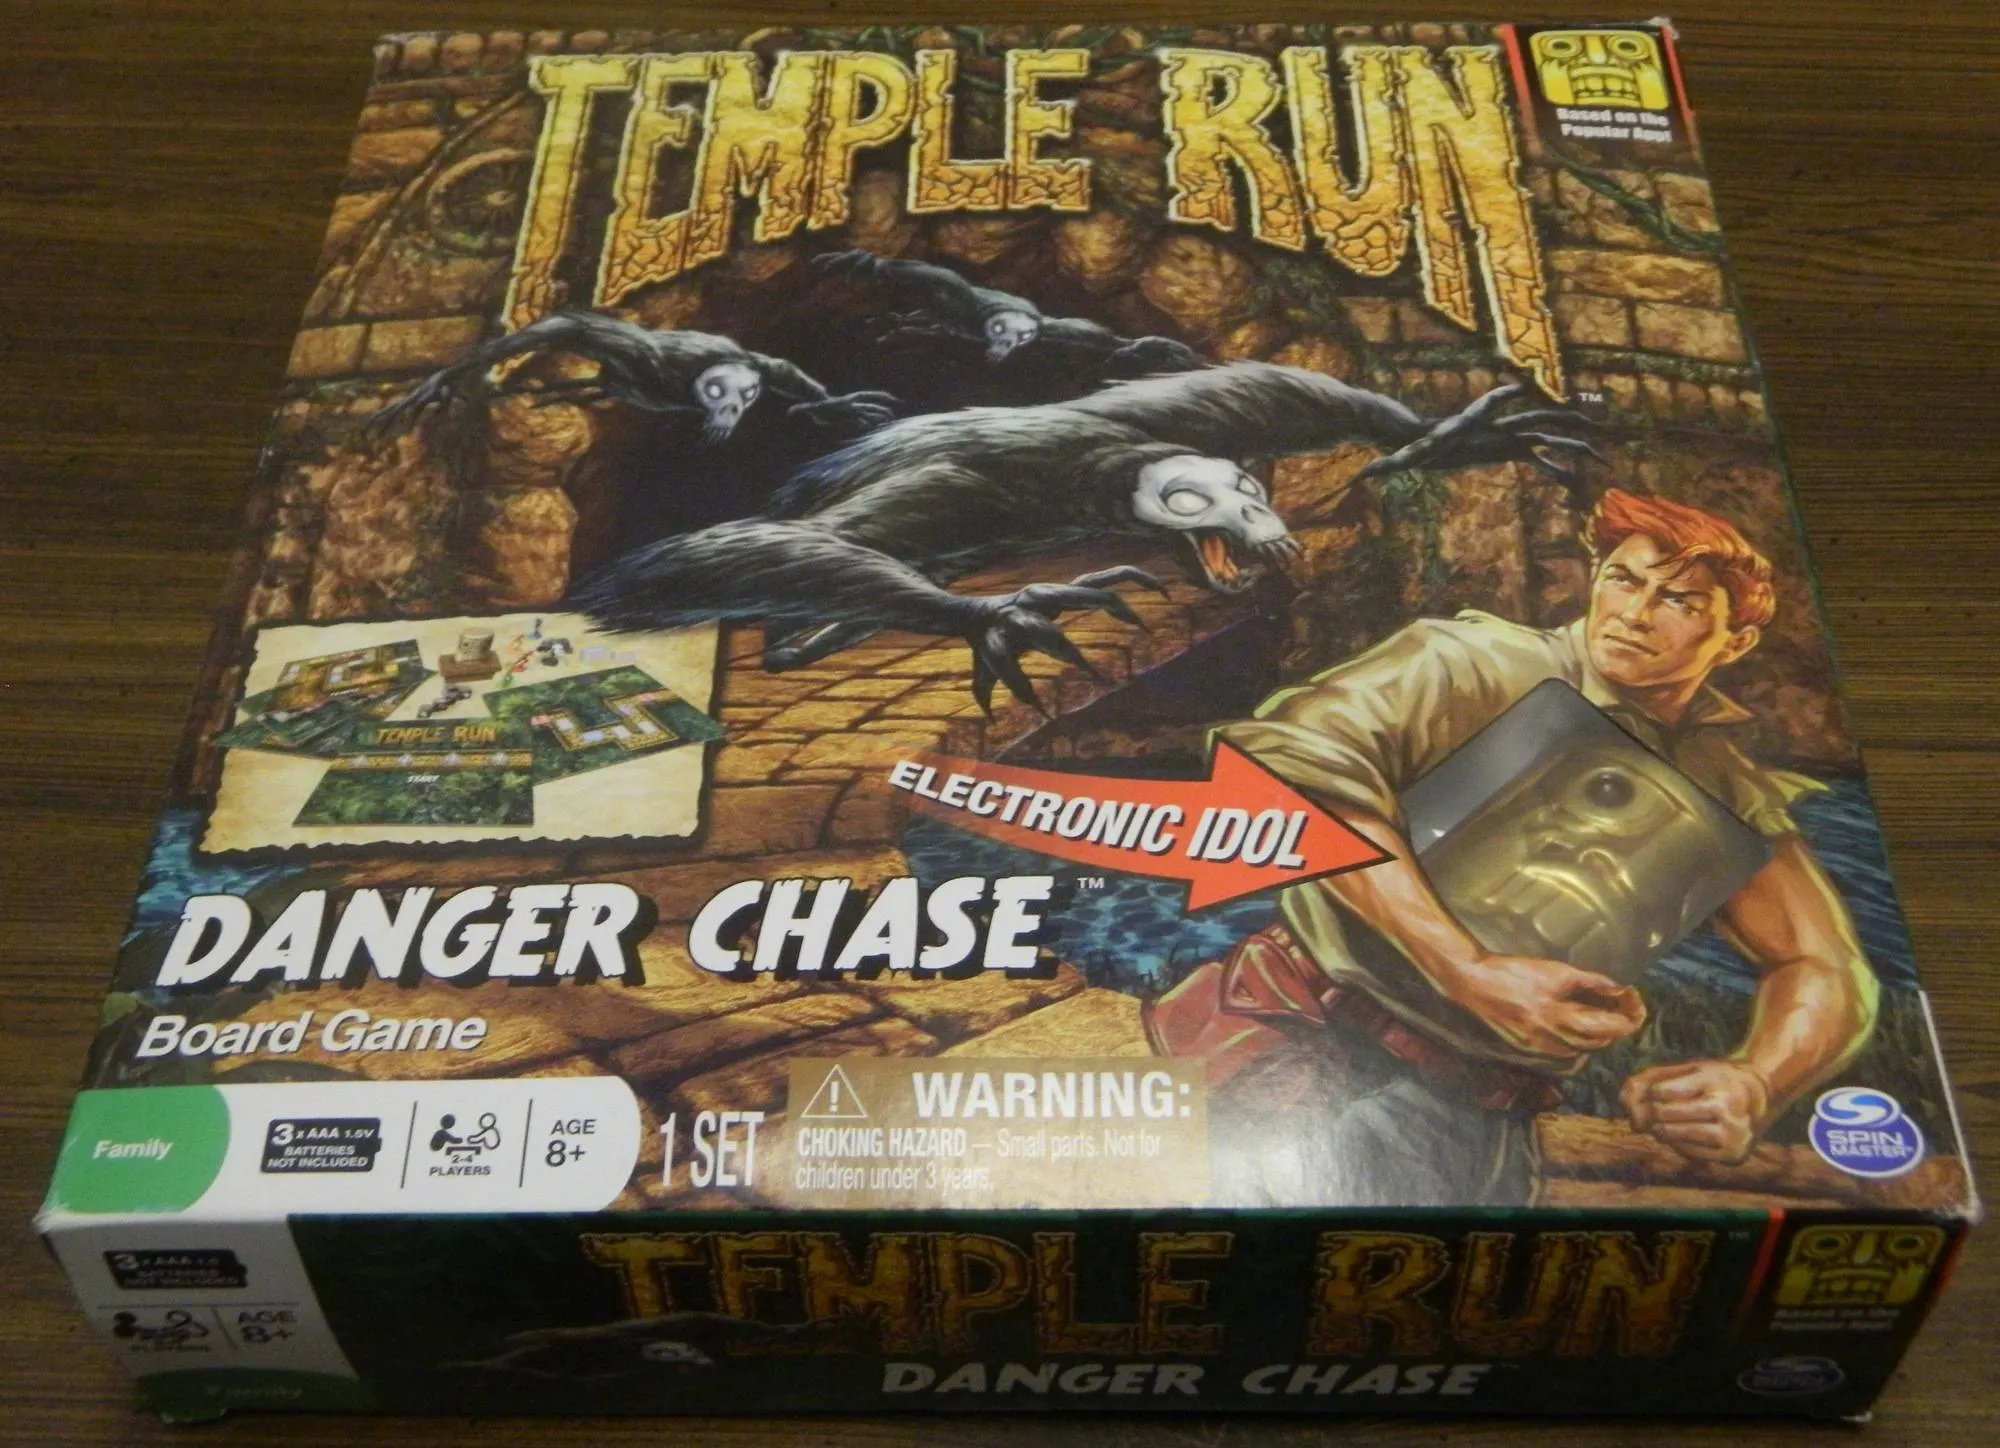 Temple Run: Danger Chase (One Couple's Review)